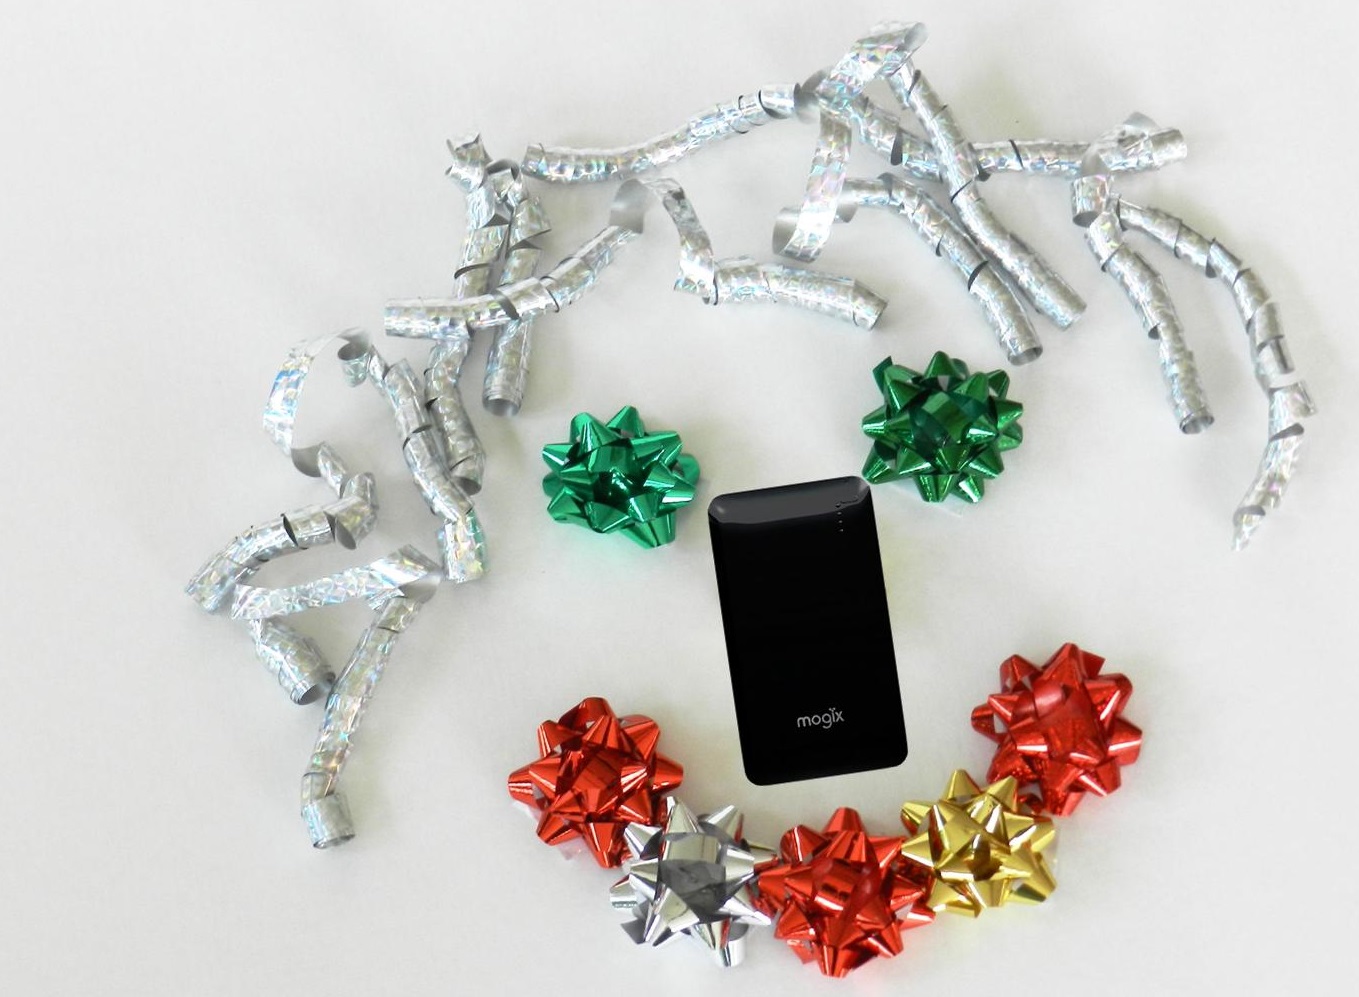 Small but awesome tech gifts for 2014